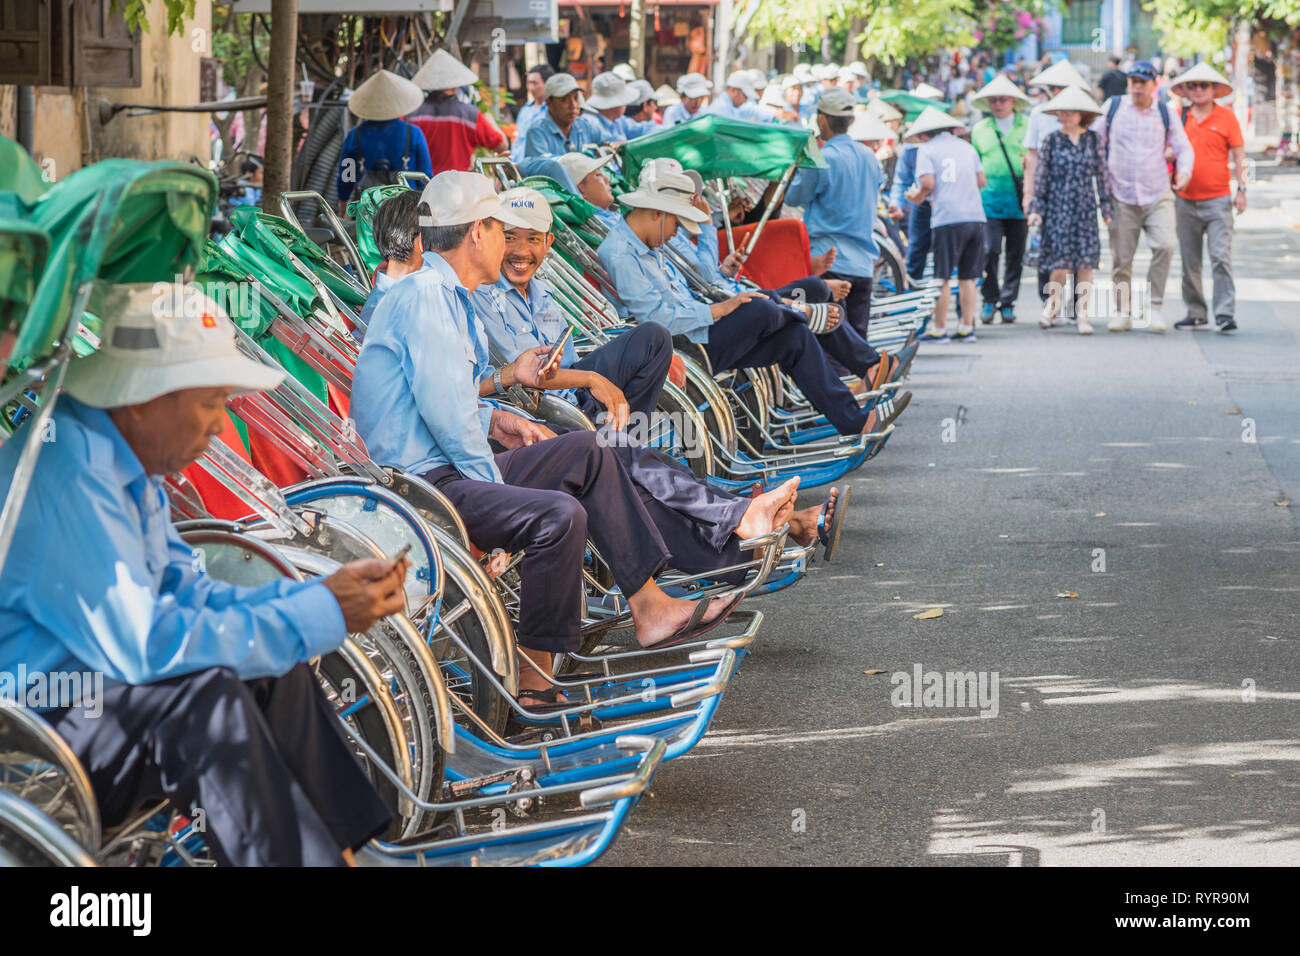 Hoi An, Vietnam - October 23, 2018: a long row of trishaws in uniforms wait for customers, an approaching group of tourists in conical hats. Stock Photo